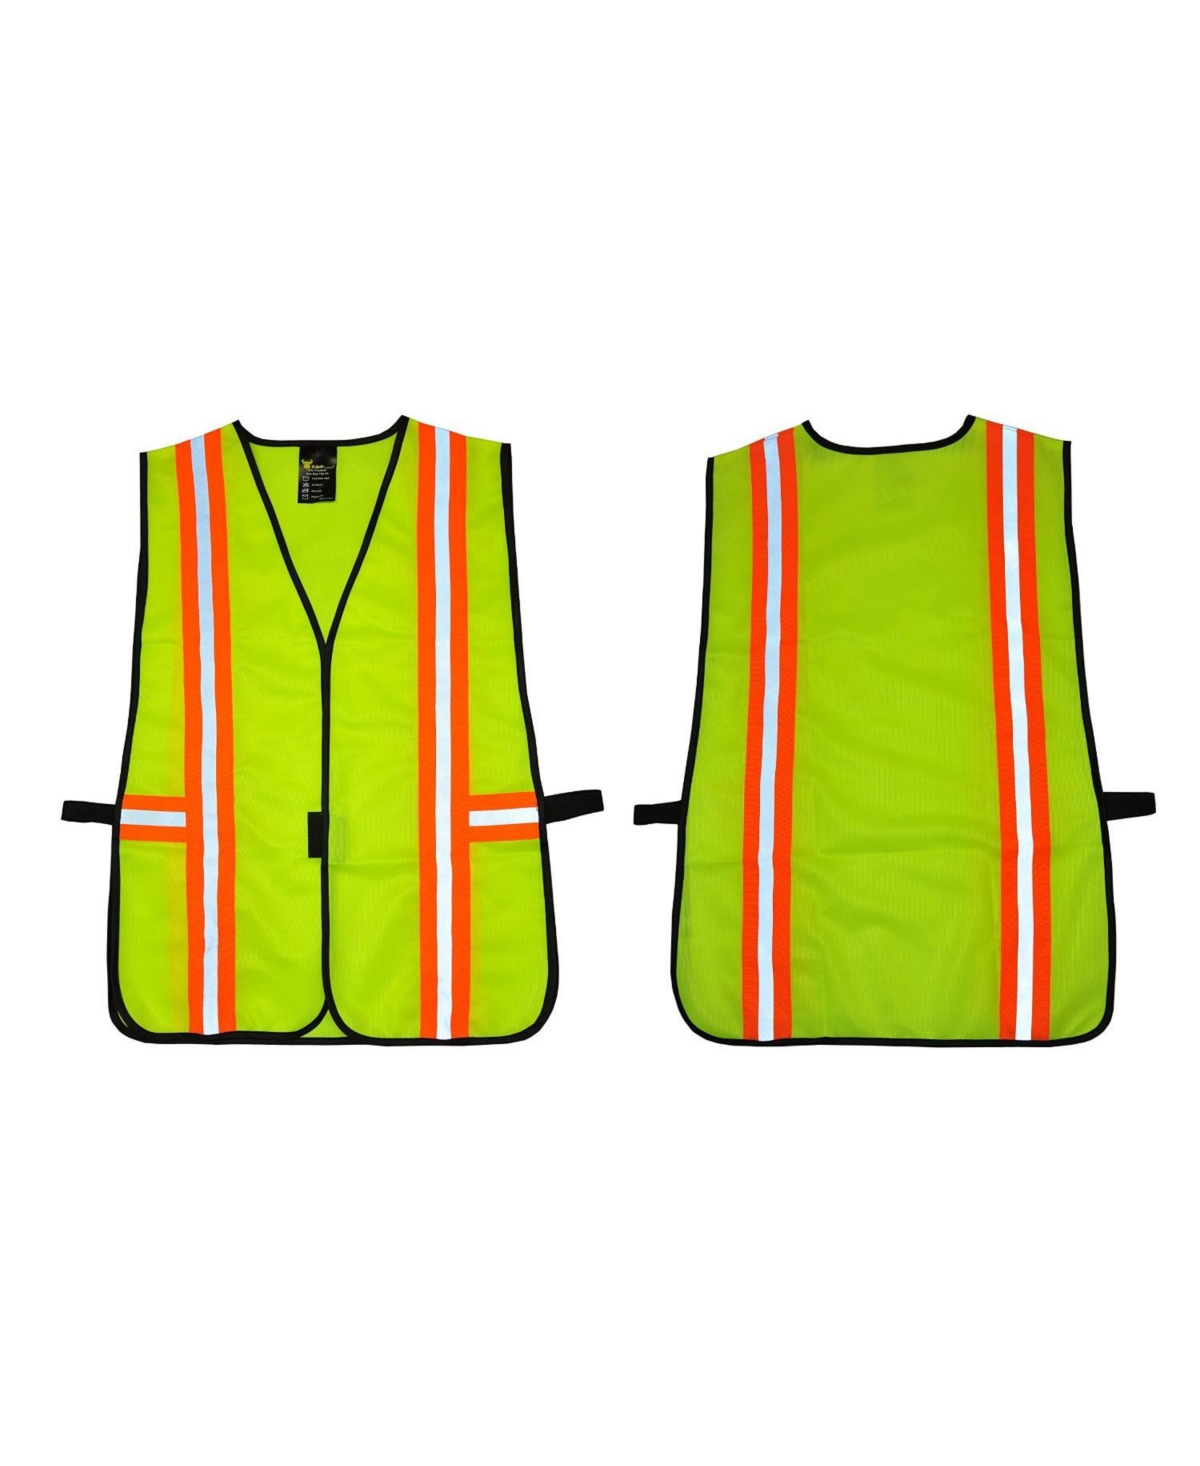 Industrial Safety Vest with Reflective Stripes - Yellow